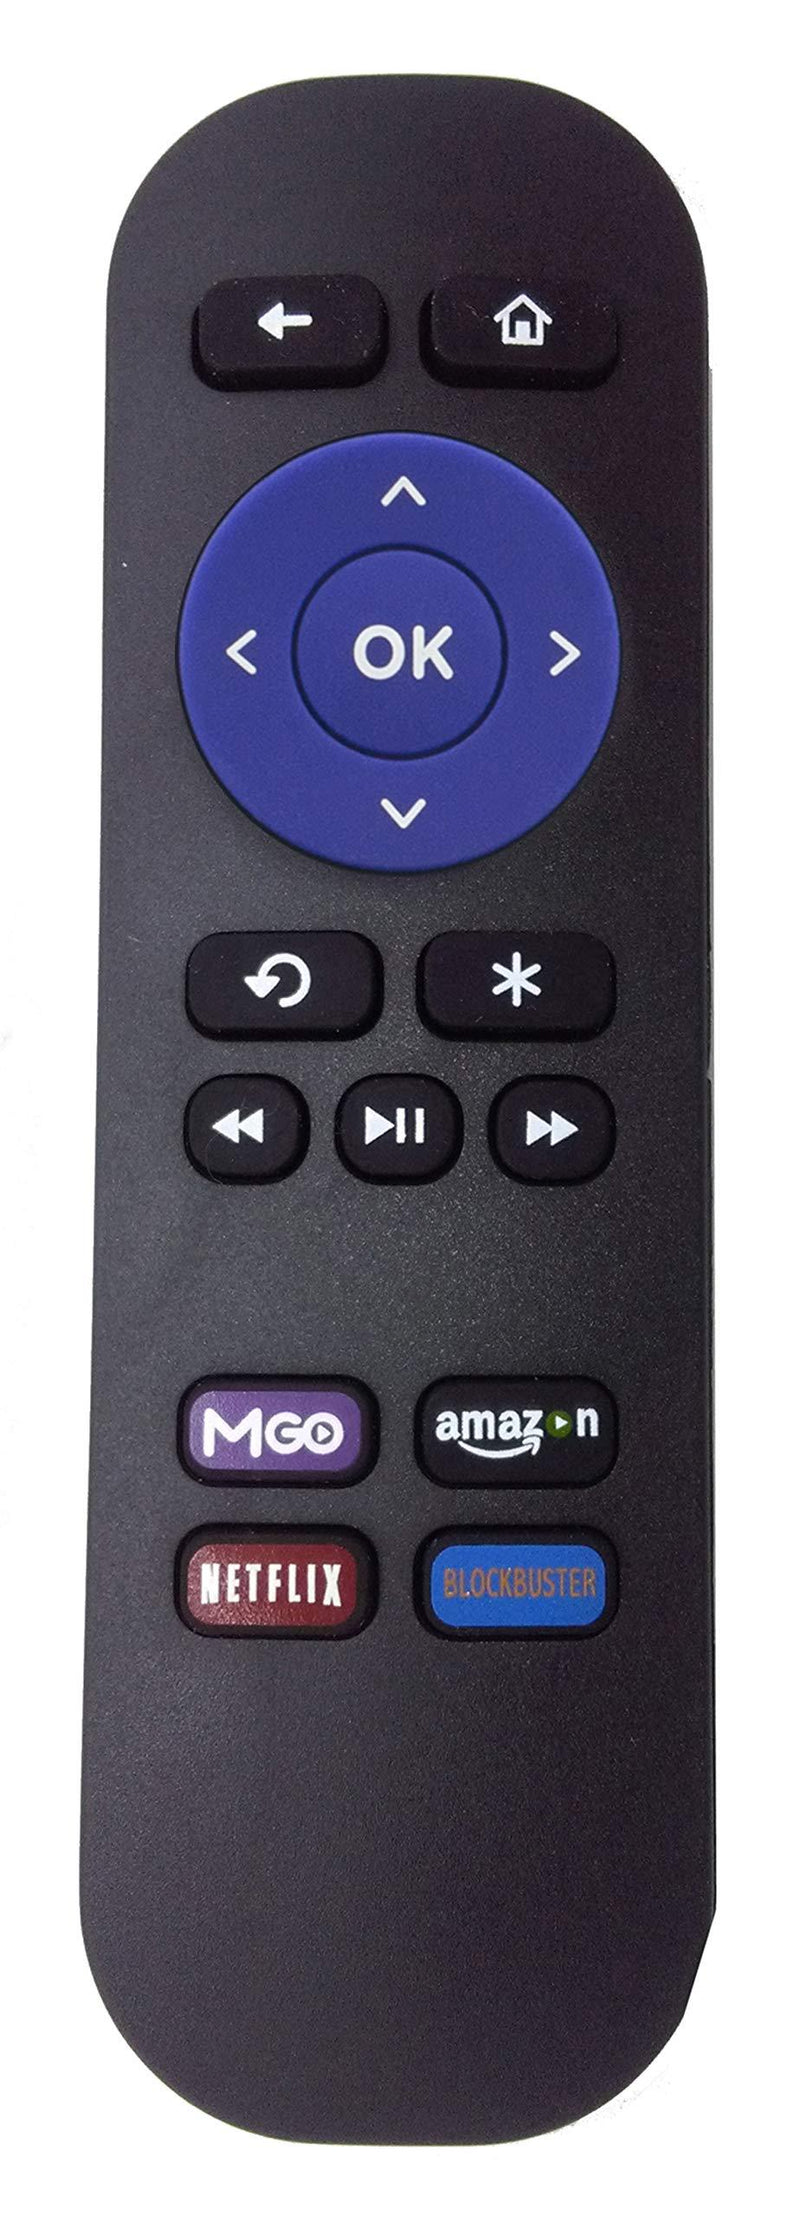 New Replaced Infrared Remote fit for Roku 4210X 1/2 / 3/4 LT HD XD XS NOT for roku Stick or HDMI or TCL roku TV - LeoForward Australia